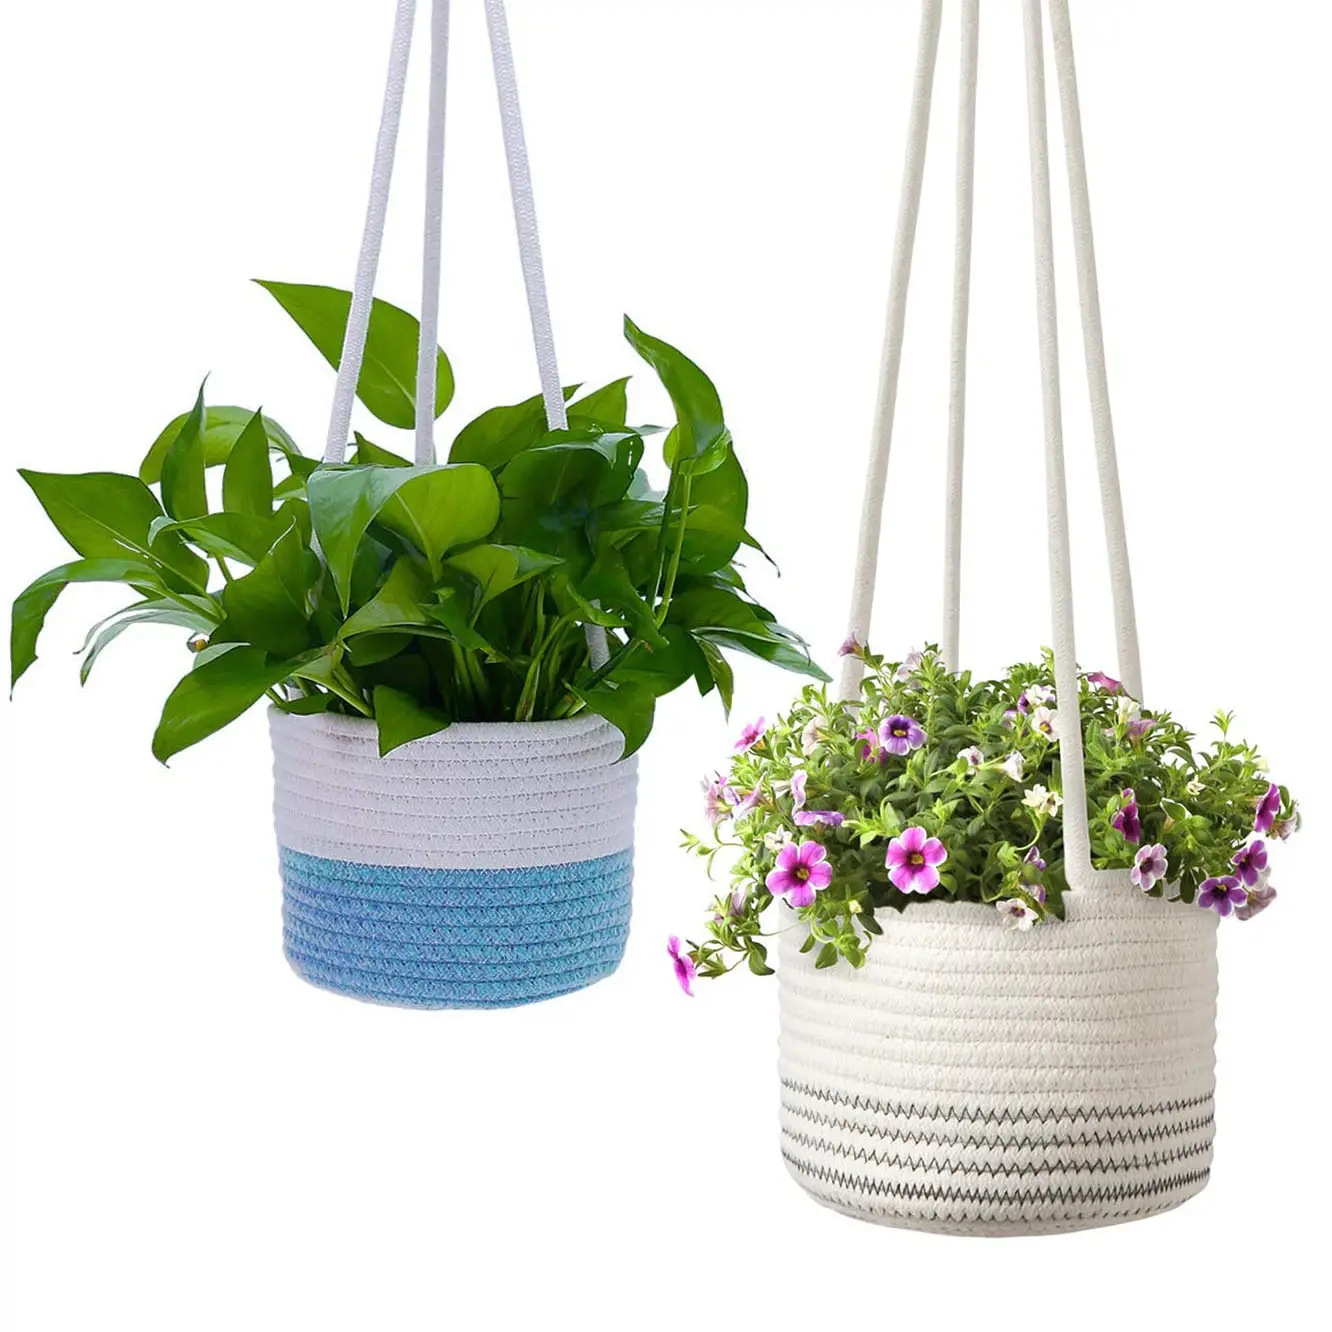 Plant Hangers Modern Home Indoor Decor Up To 7" Pot Macrame Plant Hangers Cotton Rope Hanging Planter Woven Plant Basket Suspended